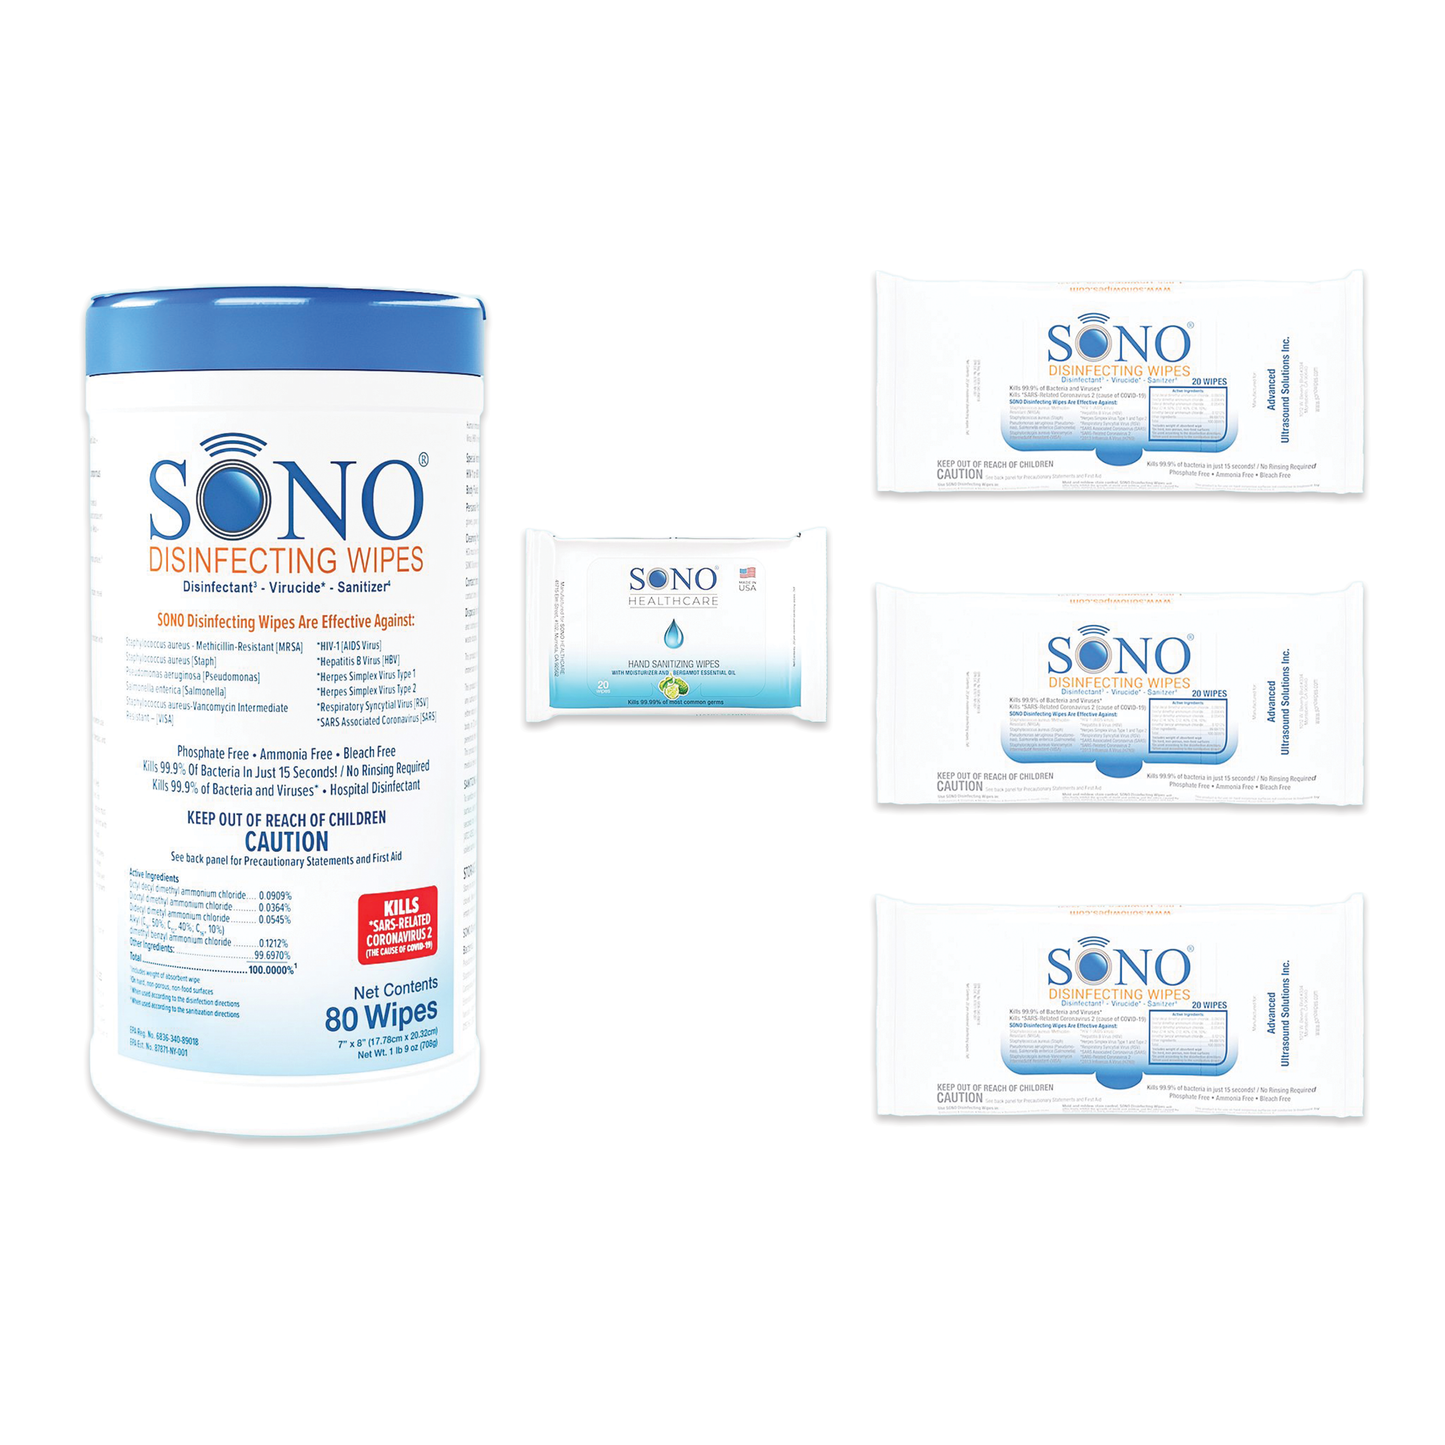 Comprehensive SONO Disinfecting Wipes Family Bundle with multiple canisters and travel packs for all-around home cleanliness, showcased on a white backdrop.